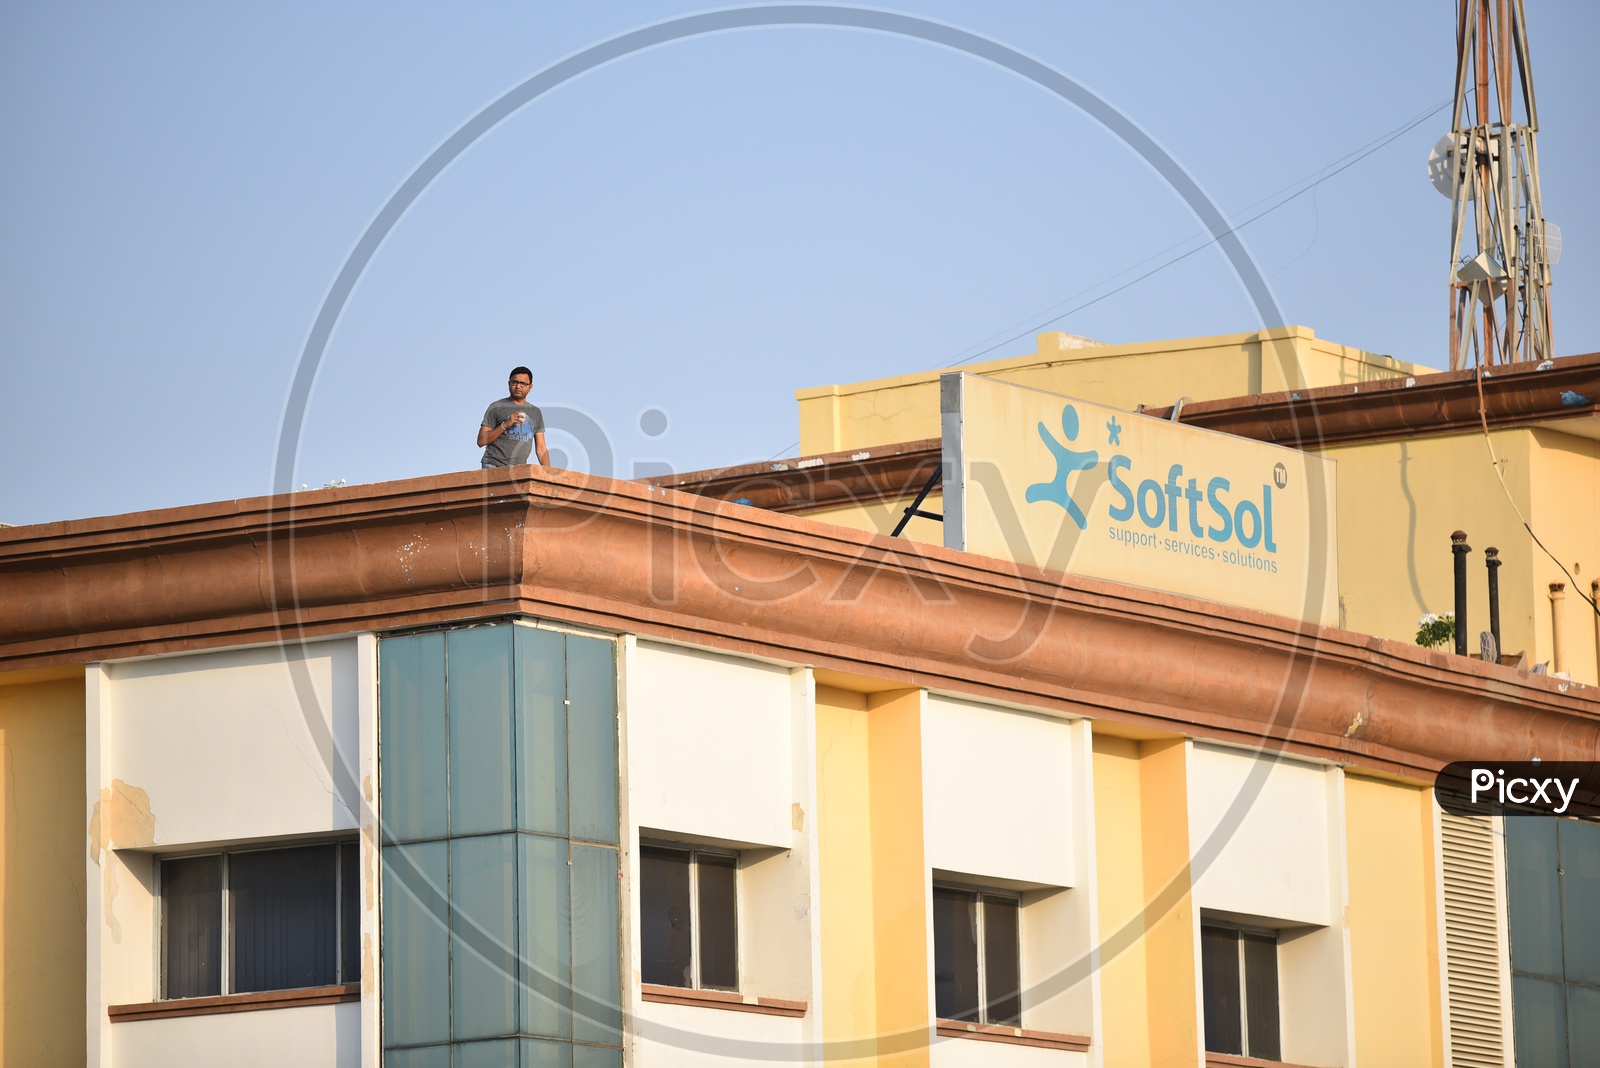 Image Of Softsol Building Hyderabad Wq373511 Picxy